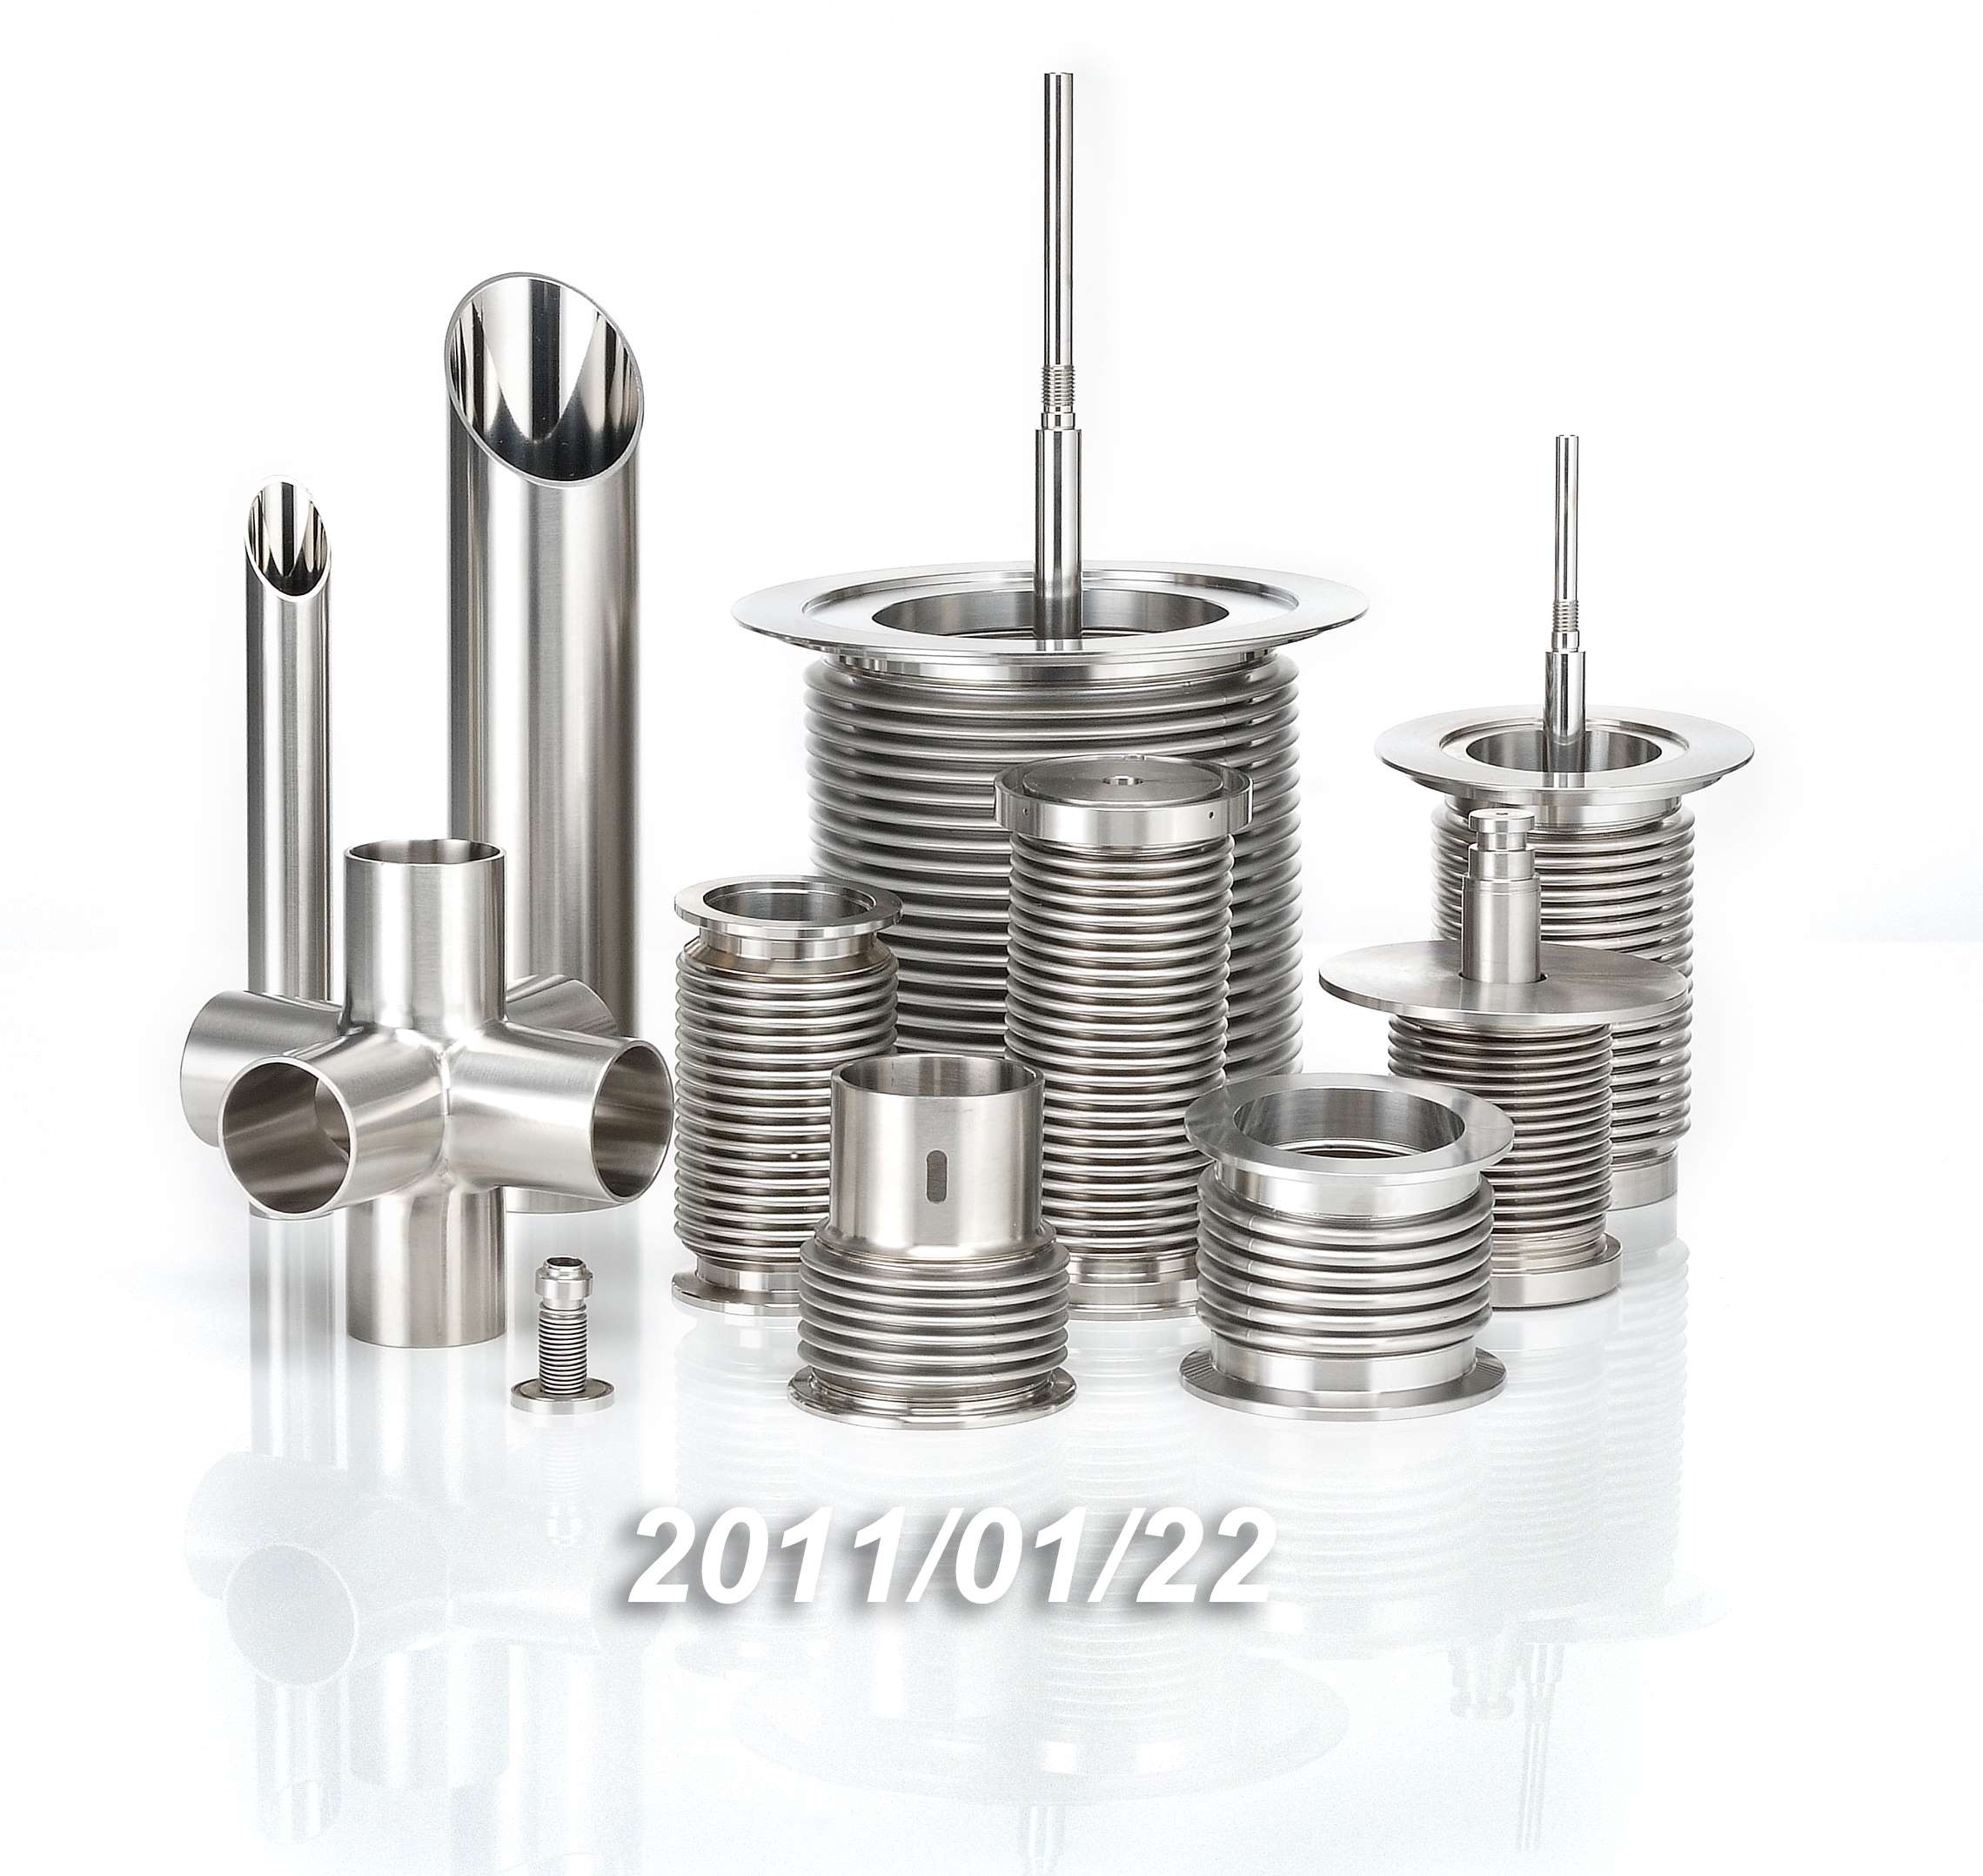 Qualified Vacuum Components Manufacturer and Supplier